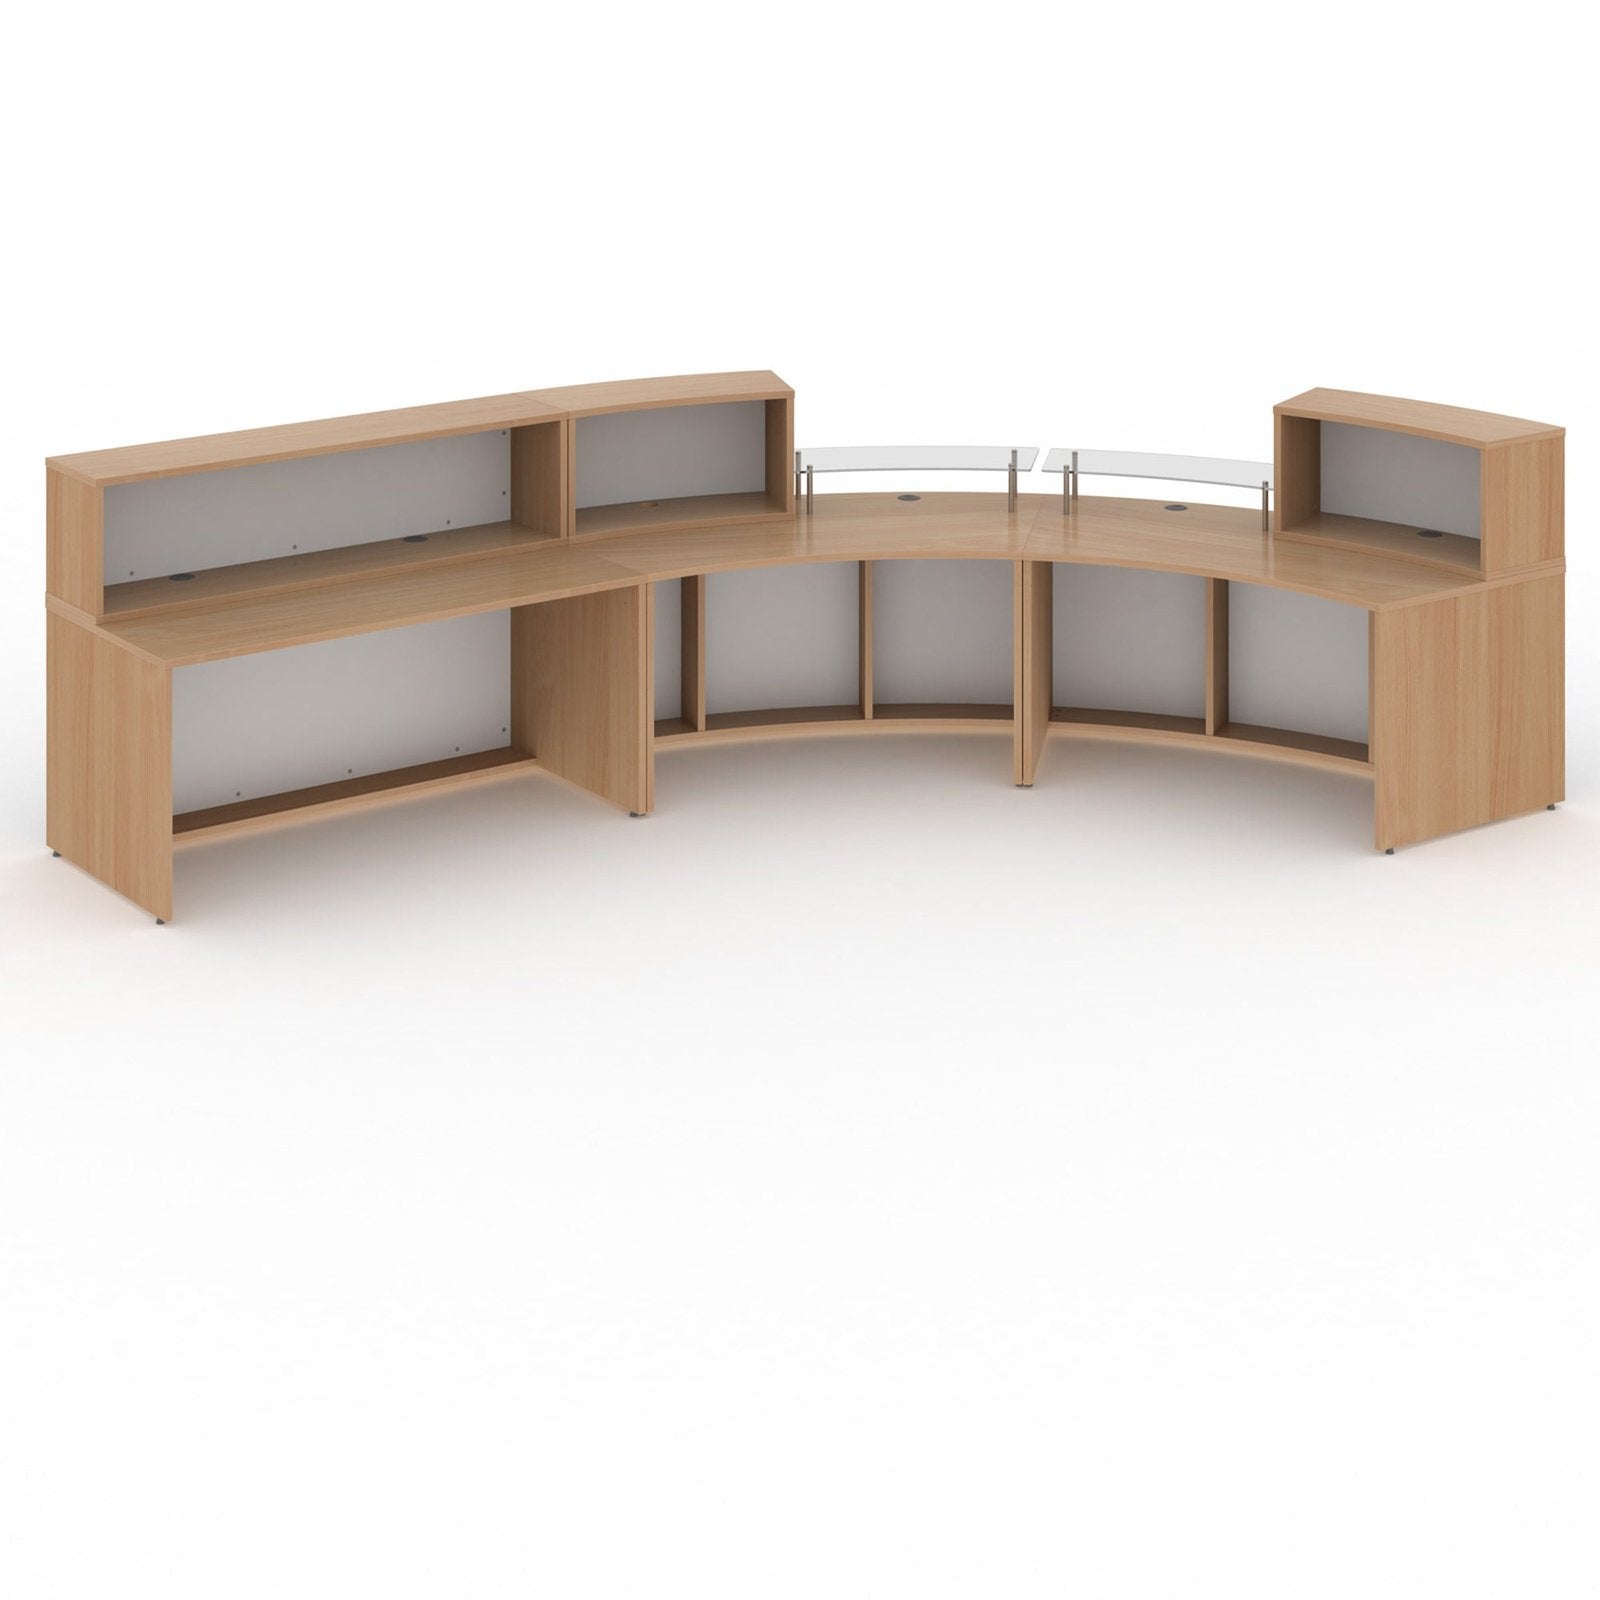 Denver extra large curved complete reception unit - Office Products Online